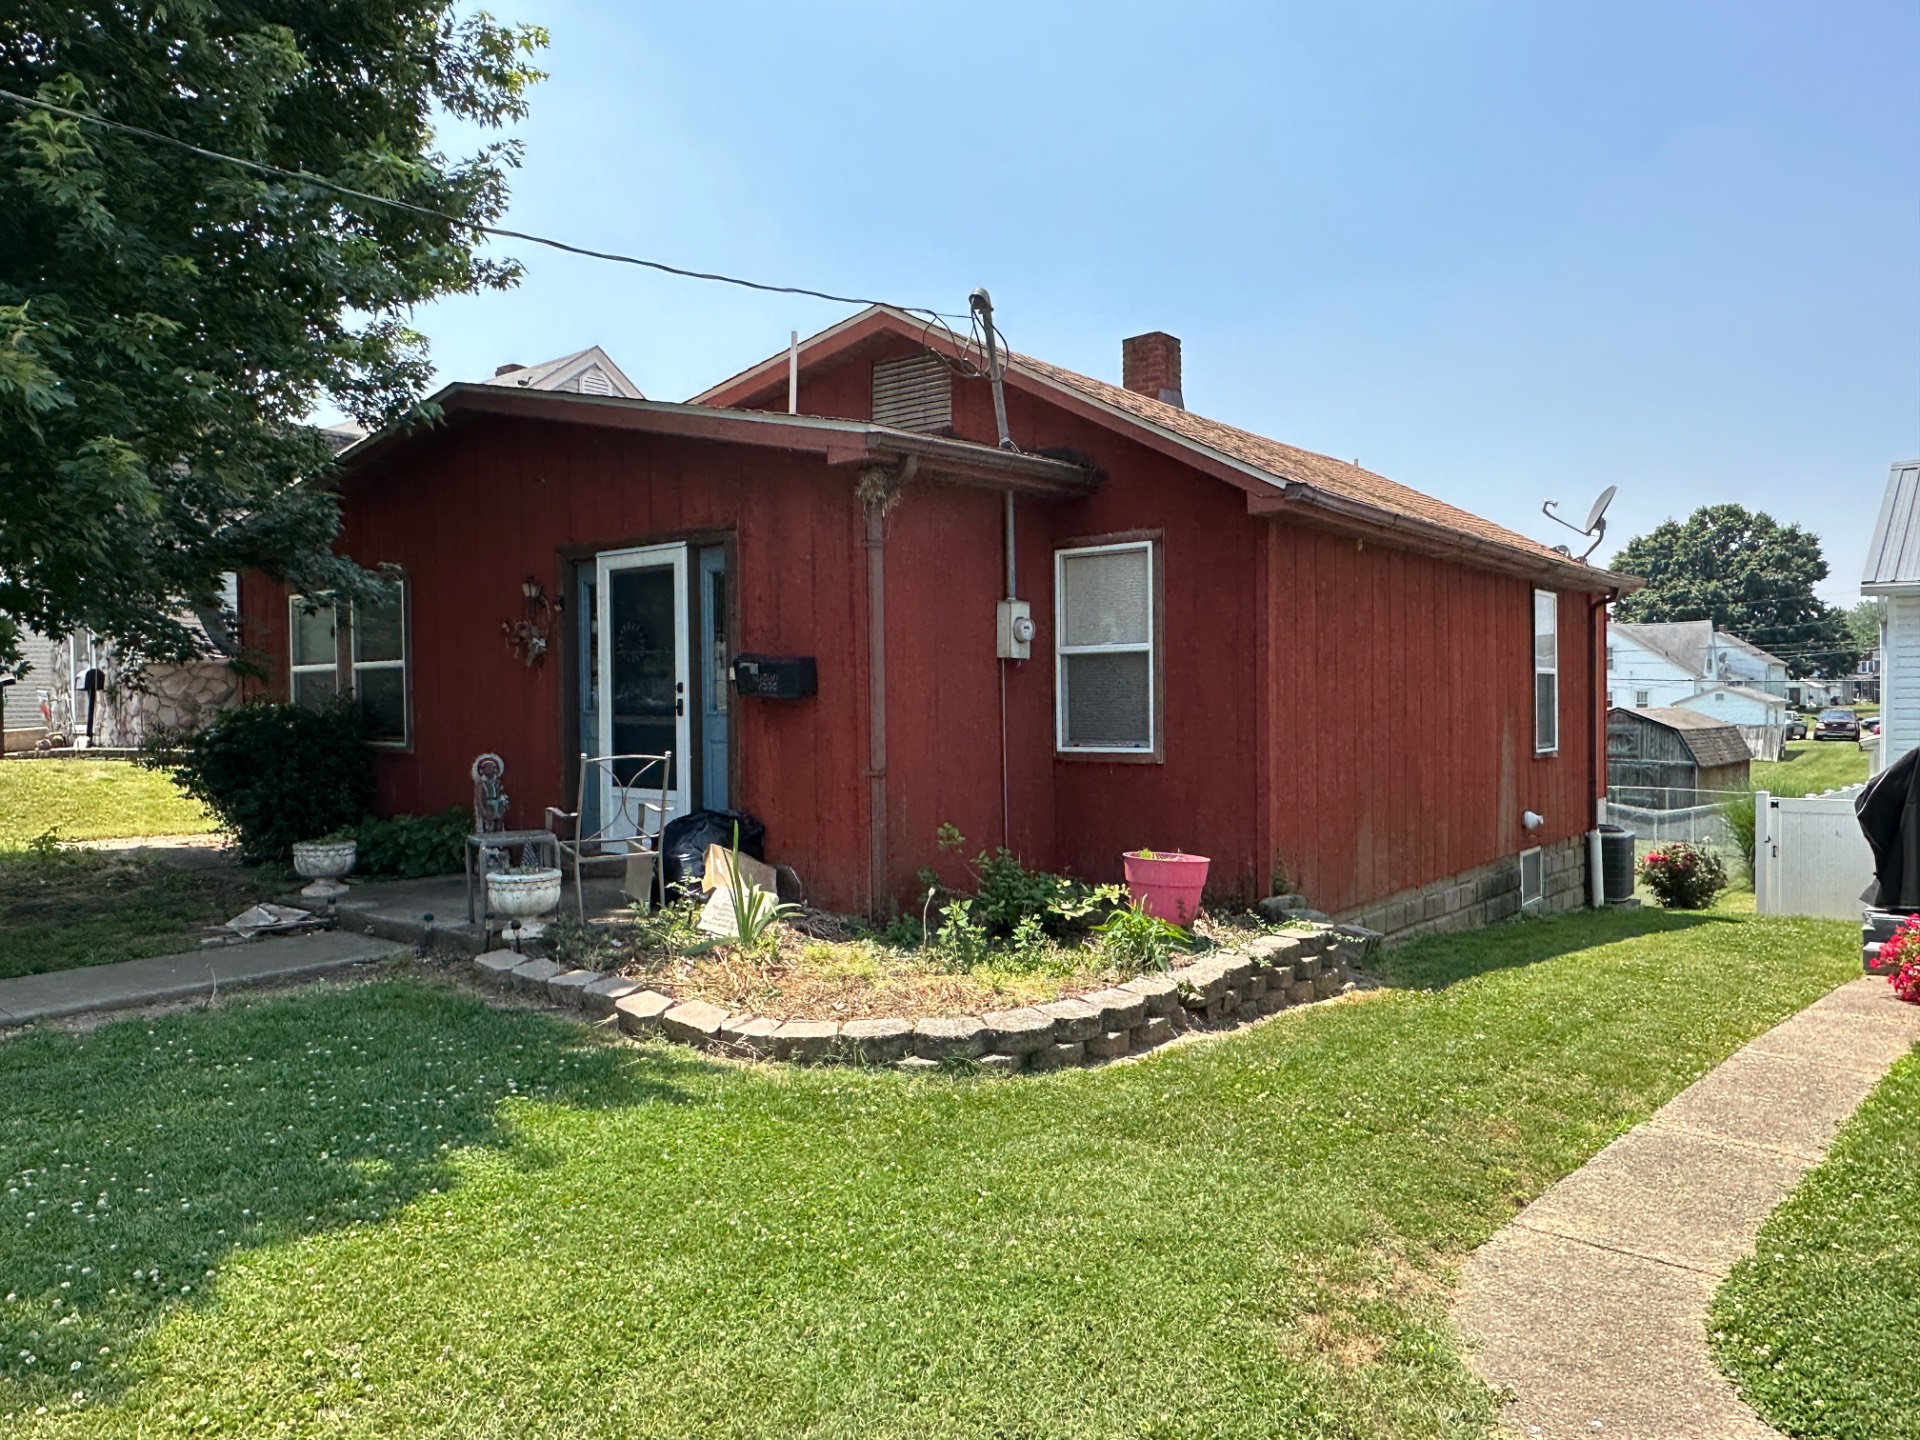 3 Bd/2 Full Bath One Level Ranch with Basement